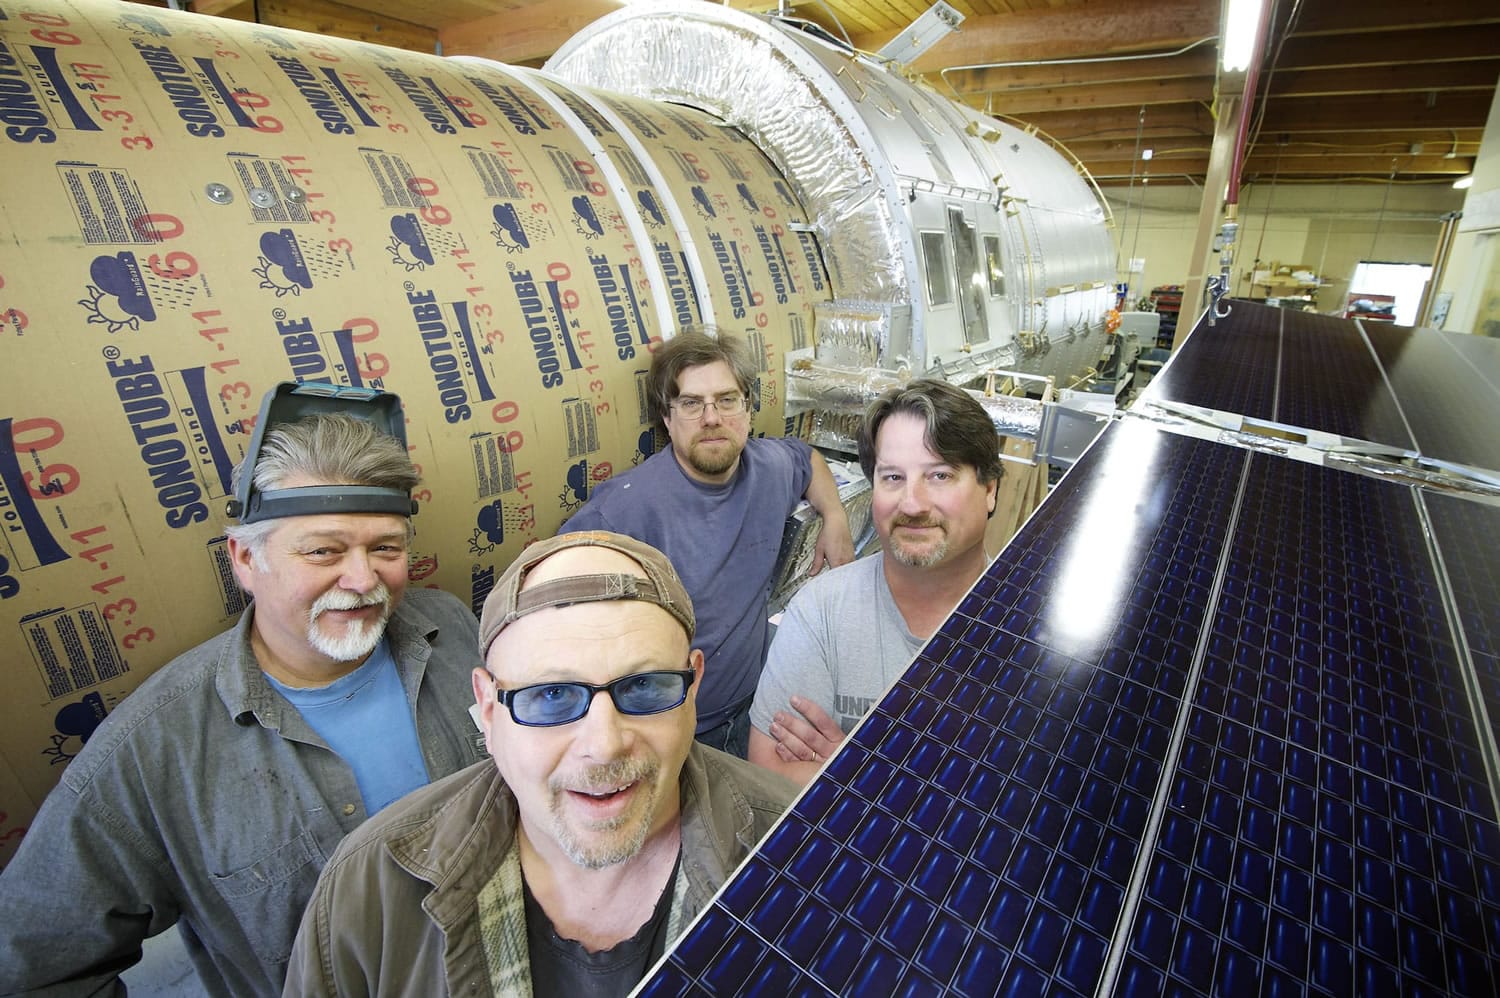 From left to right: model makers Ed Warmack, Matt Kilwein, Robert Willard, and John Geigle, owner of Masterpiece Models, stand next to a model of Hubble Wednesday June 6, 2012. Model makers are working on building a half-scale replica of Hubble Telescope for the Museum of Flight in Seattle.